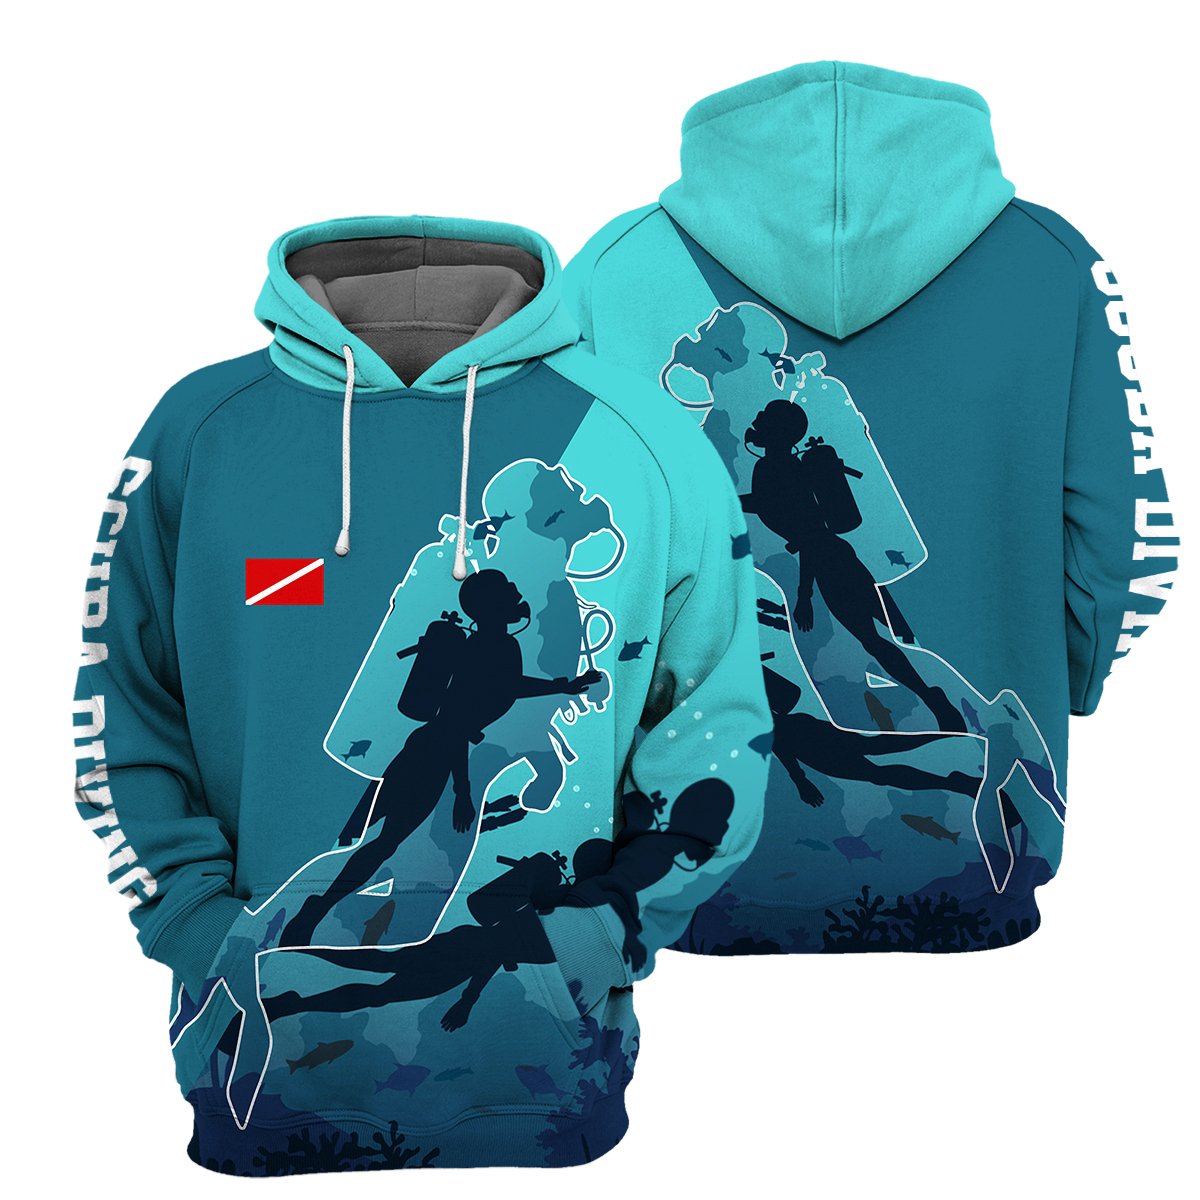 Scuba Diving 3D All Over Printed hoodie, t-shirt and zip hoodie